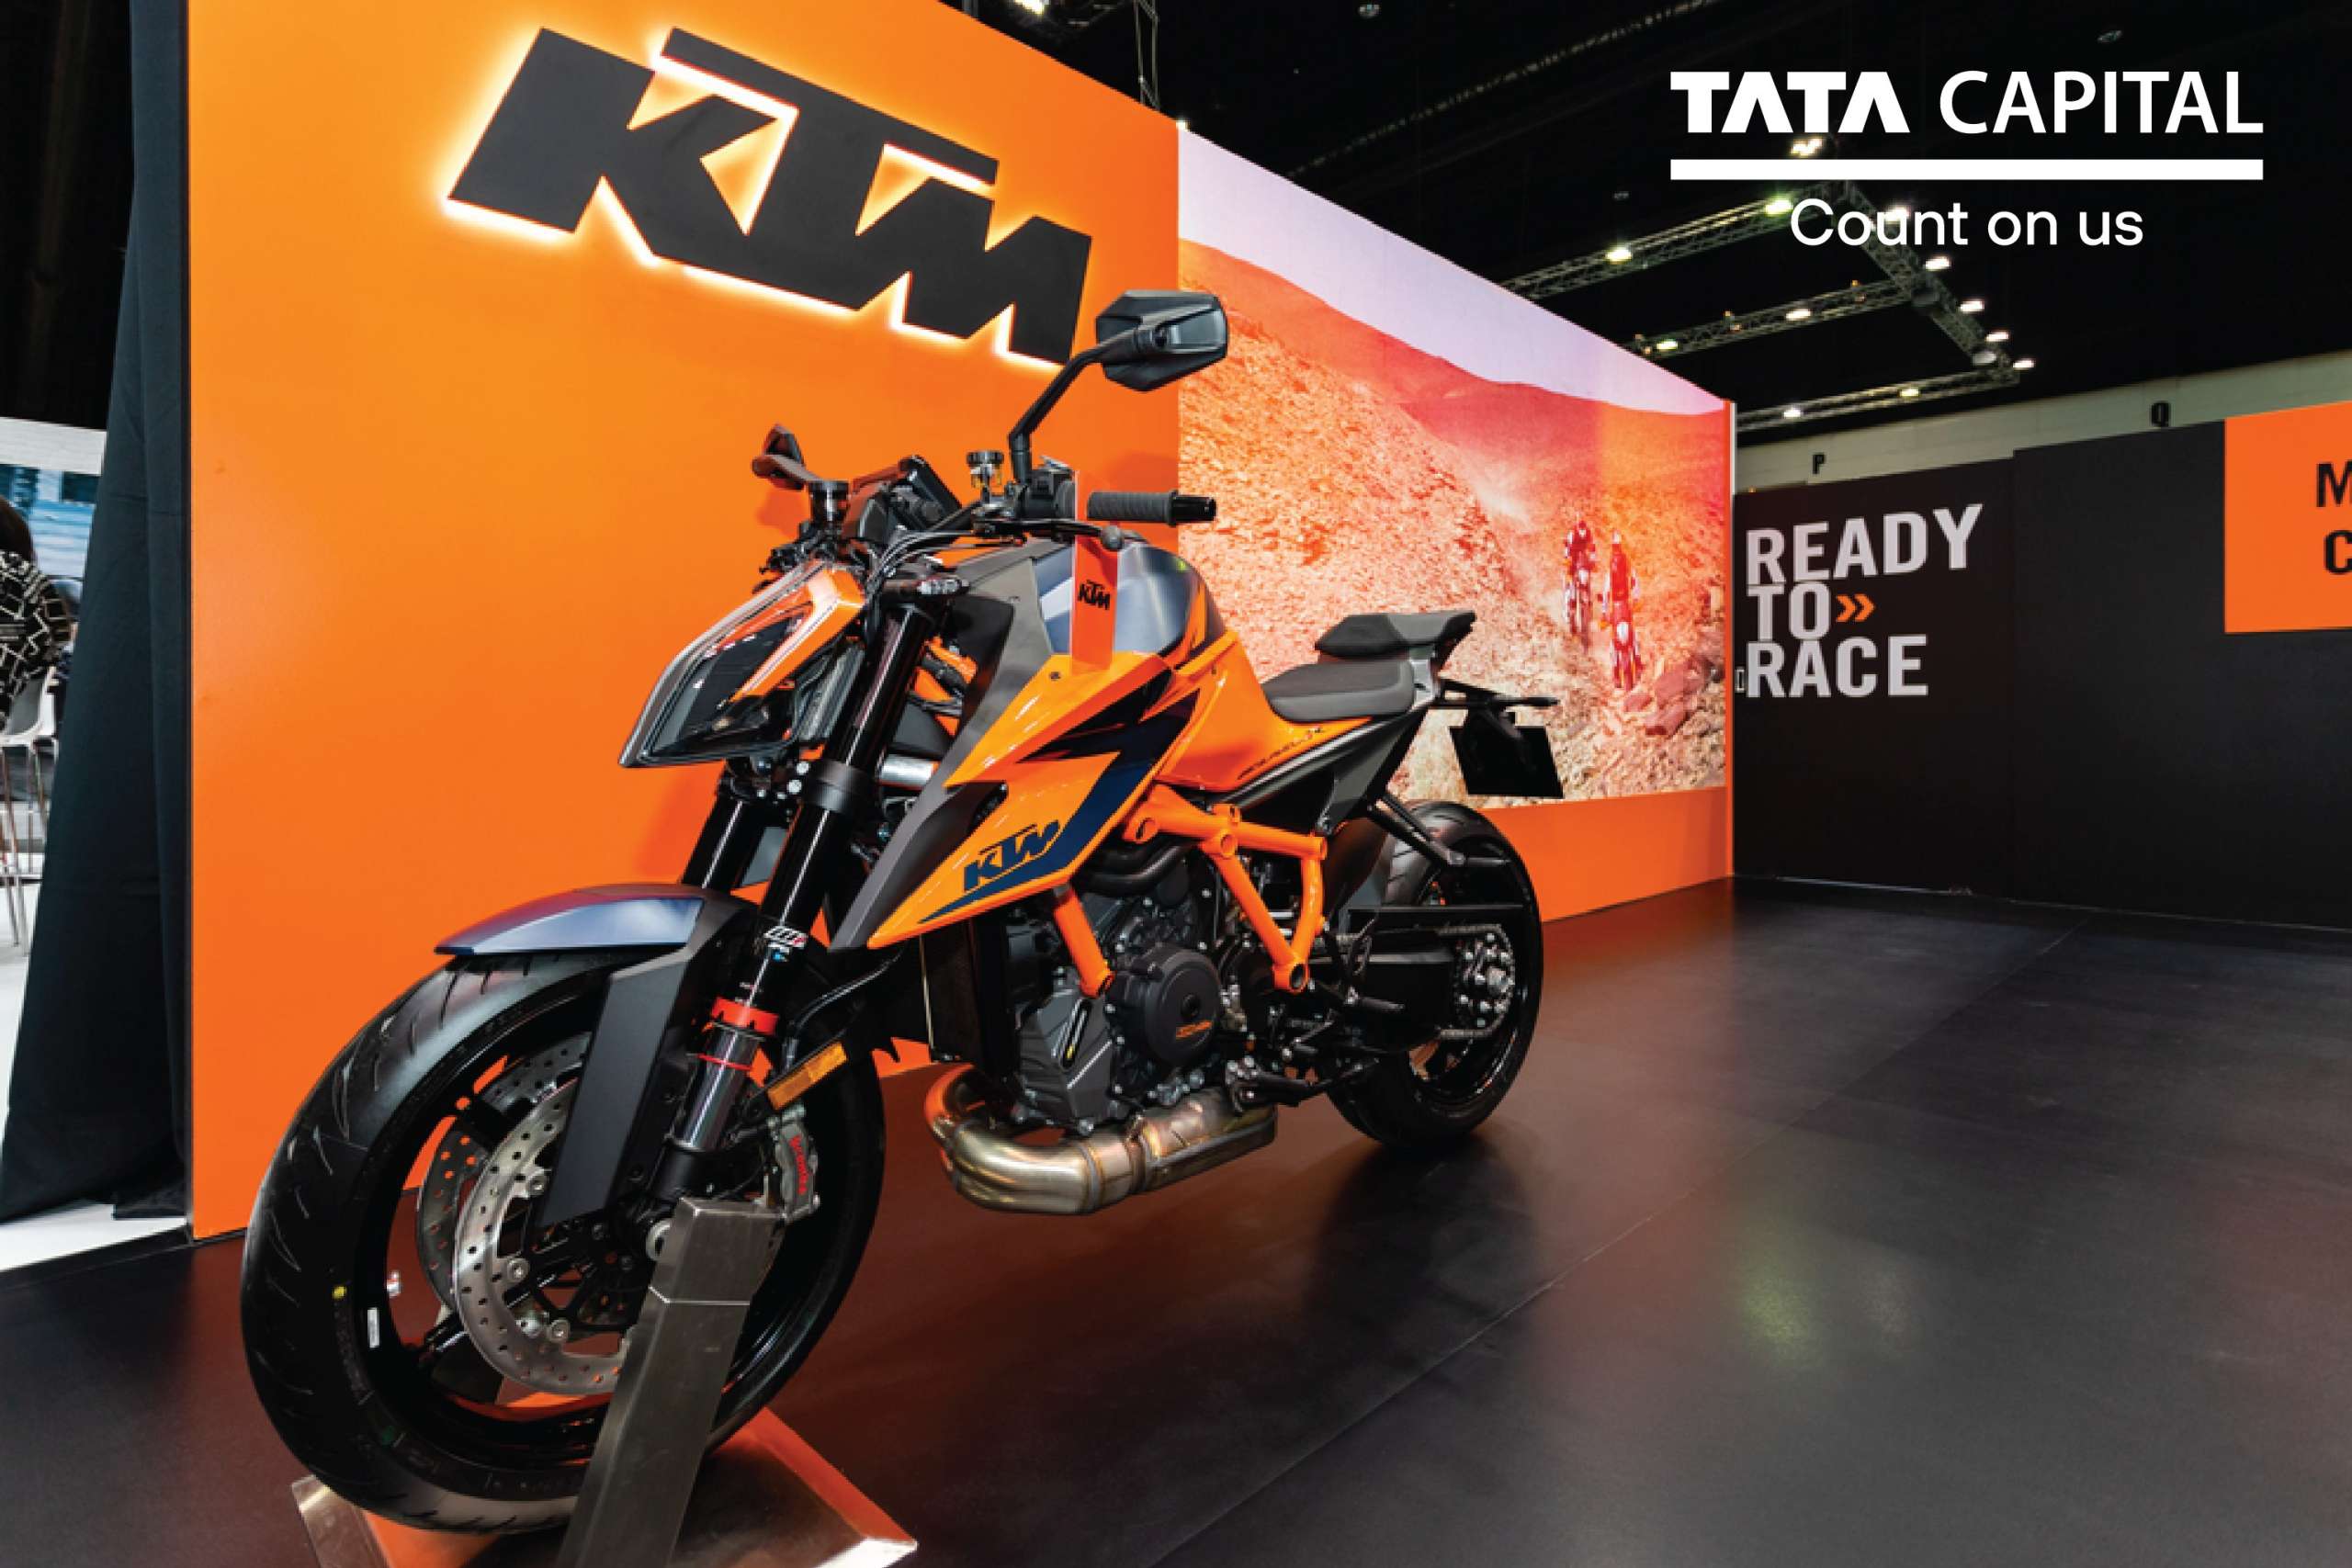 Upcoming KTM Bikes in 2023 – New Models, Updates to Old Models, Etc.